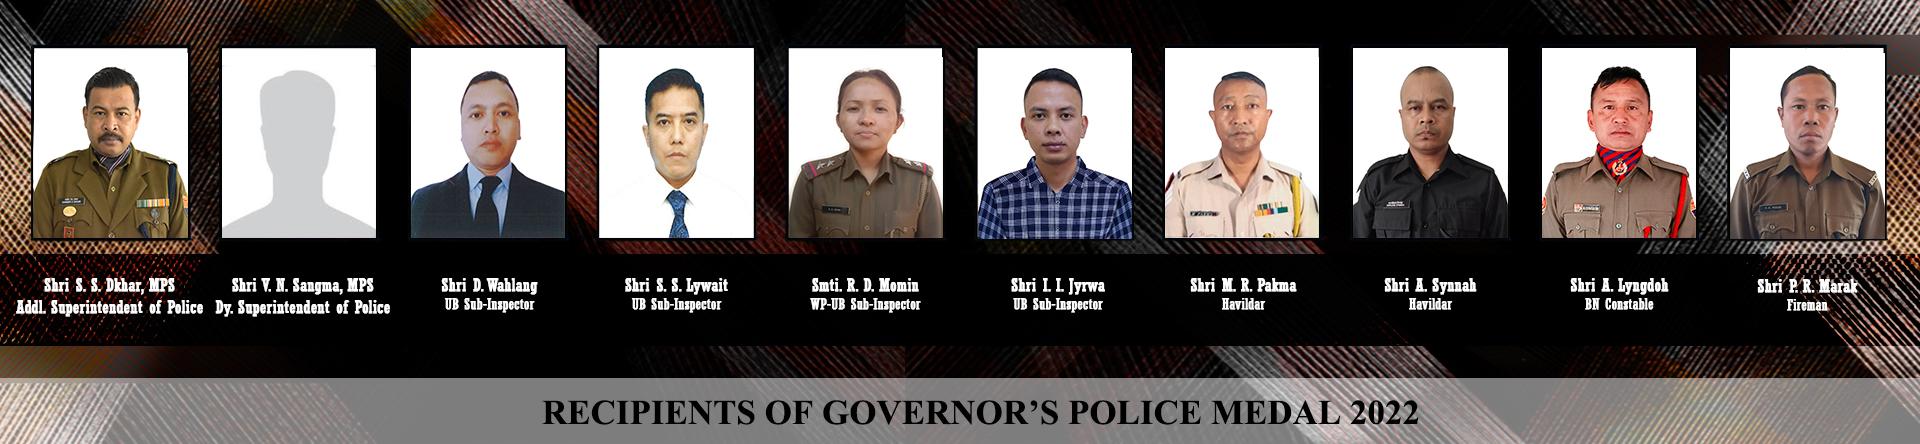 Recipients of Governors Medal 2022